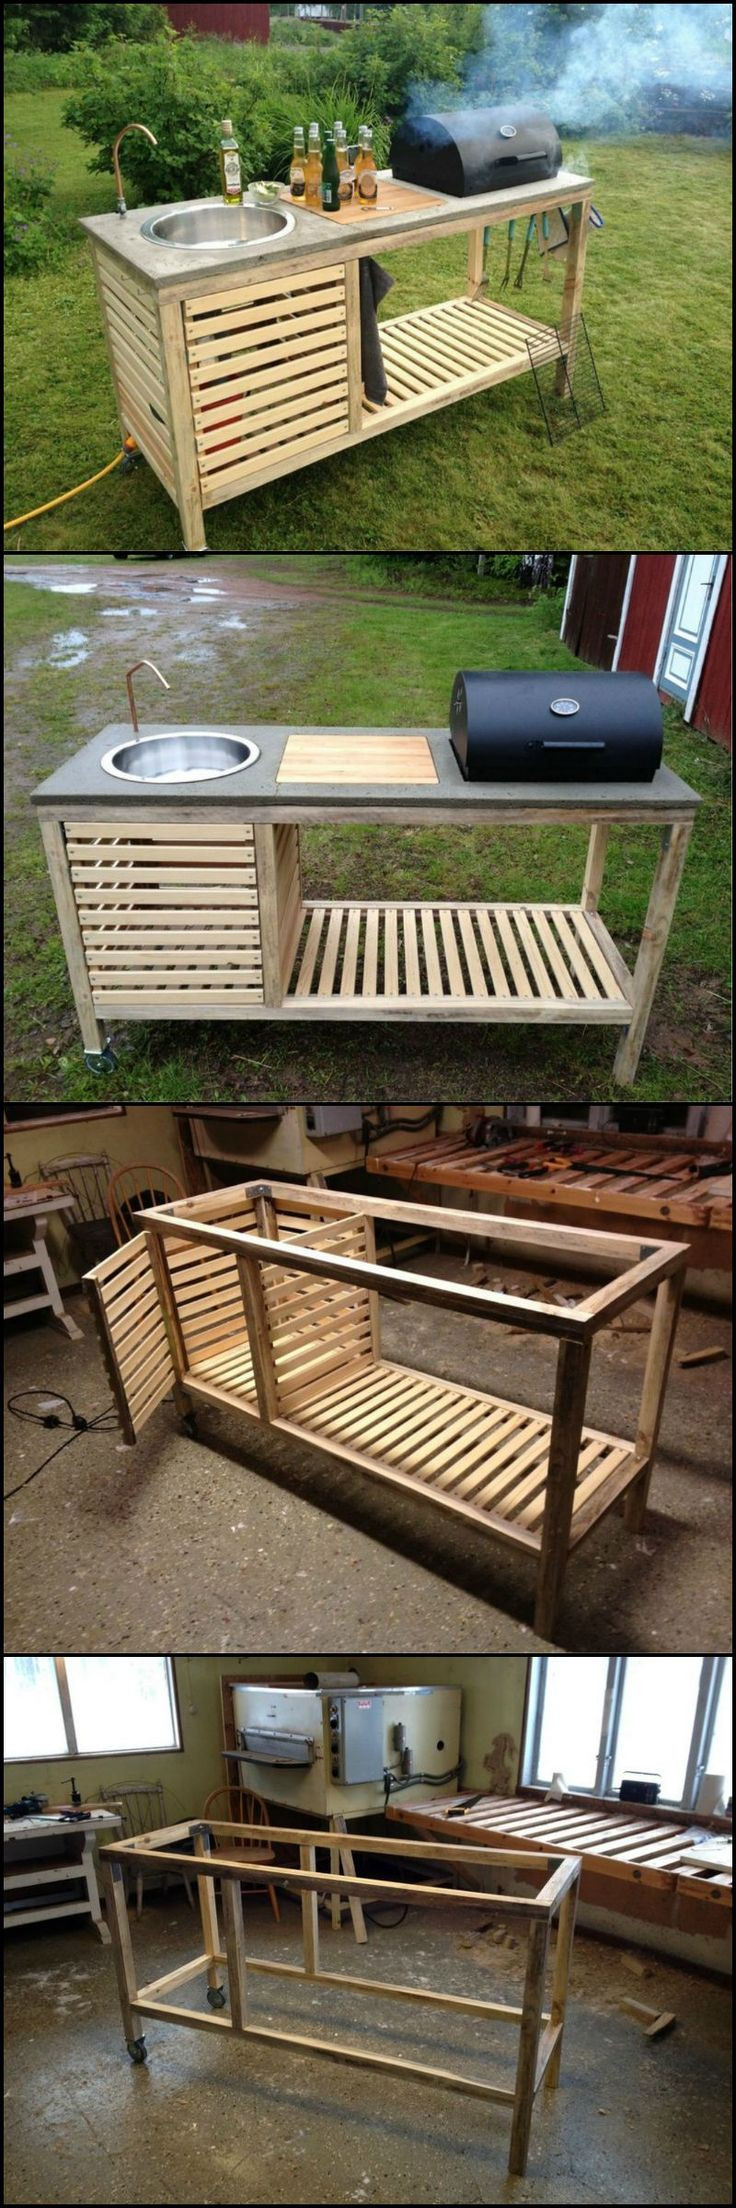 Portable Outdoor Kitchen
 How To Build A Portable Kitchen For Your Backyard